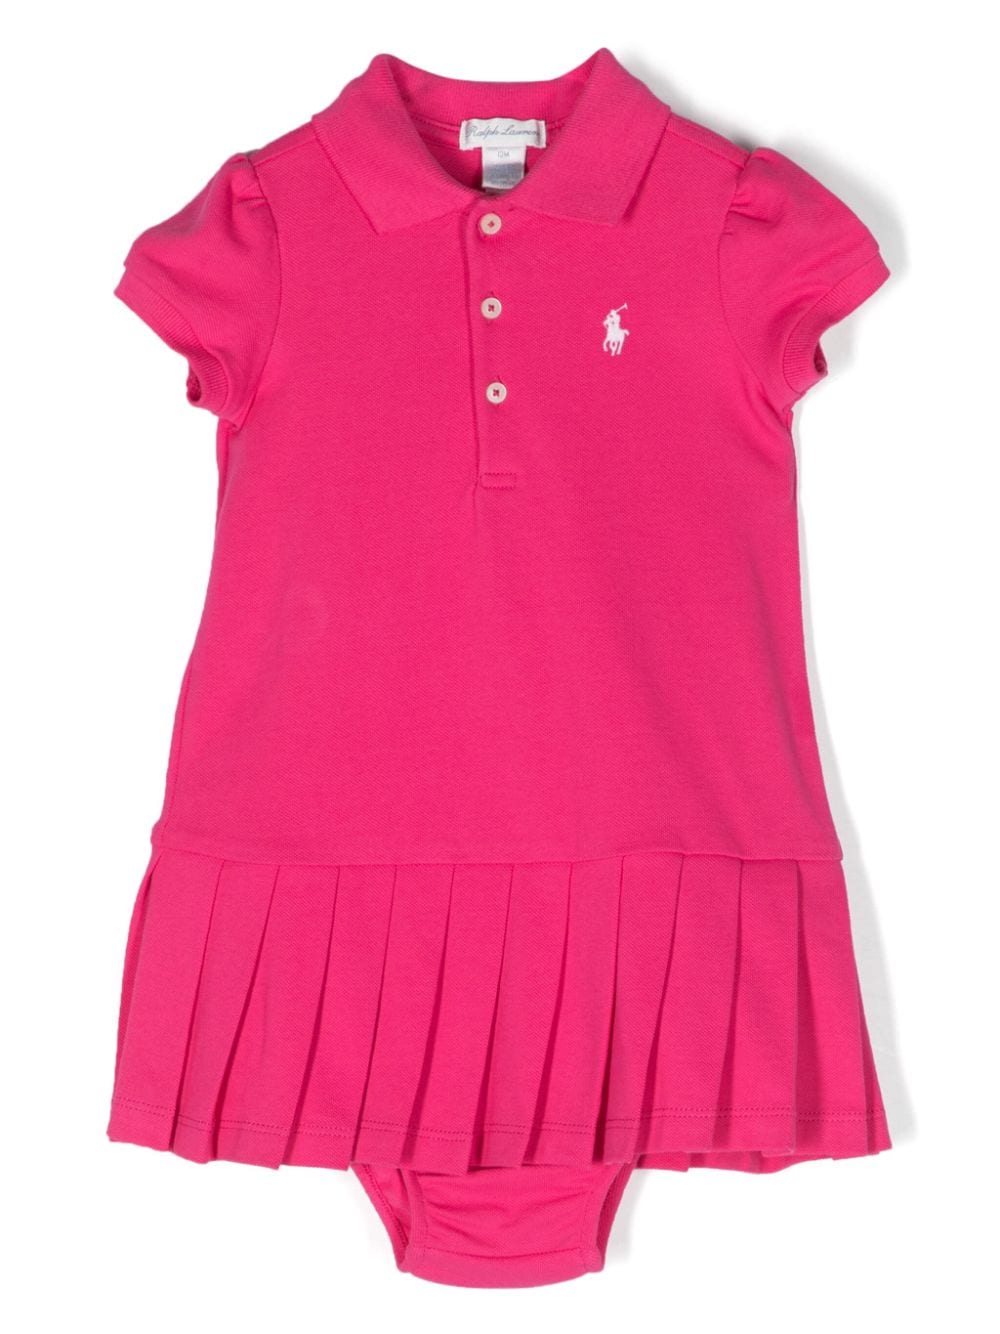 Polo Pony-embroidered cotton dress<BR/><BR/><BR/>